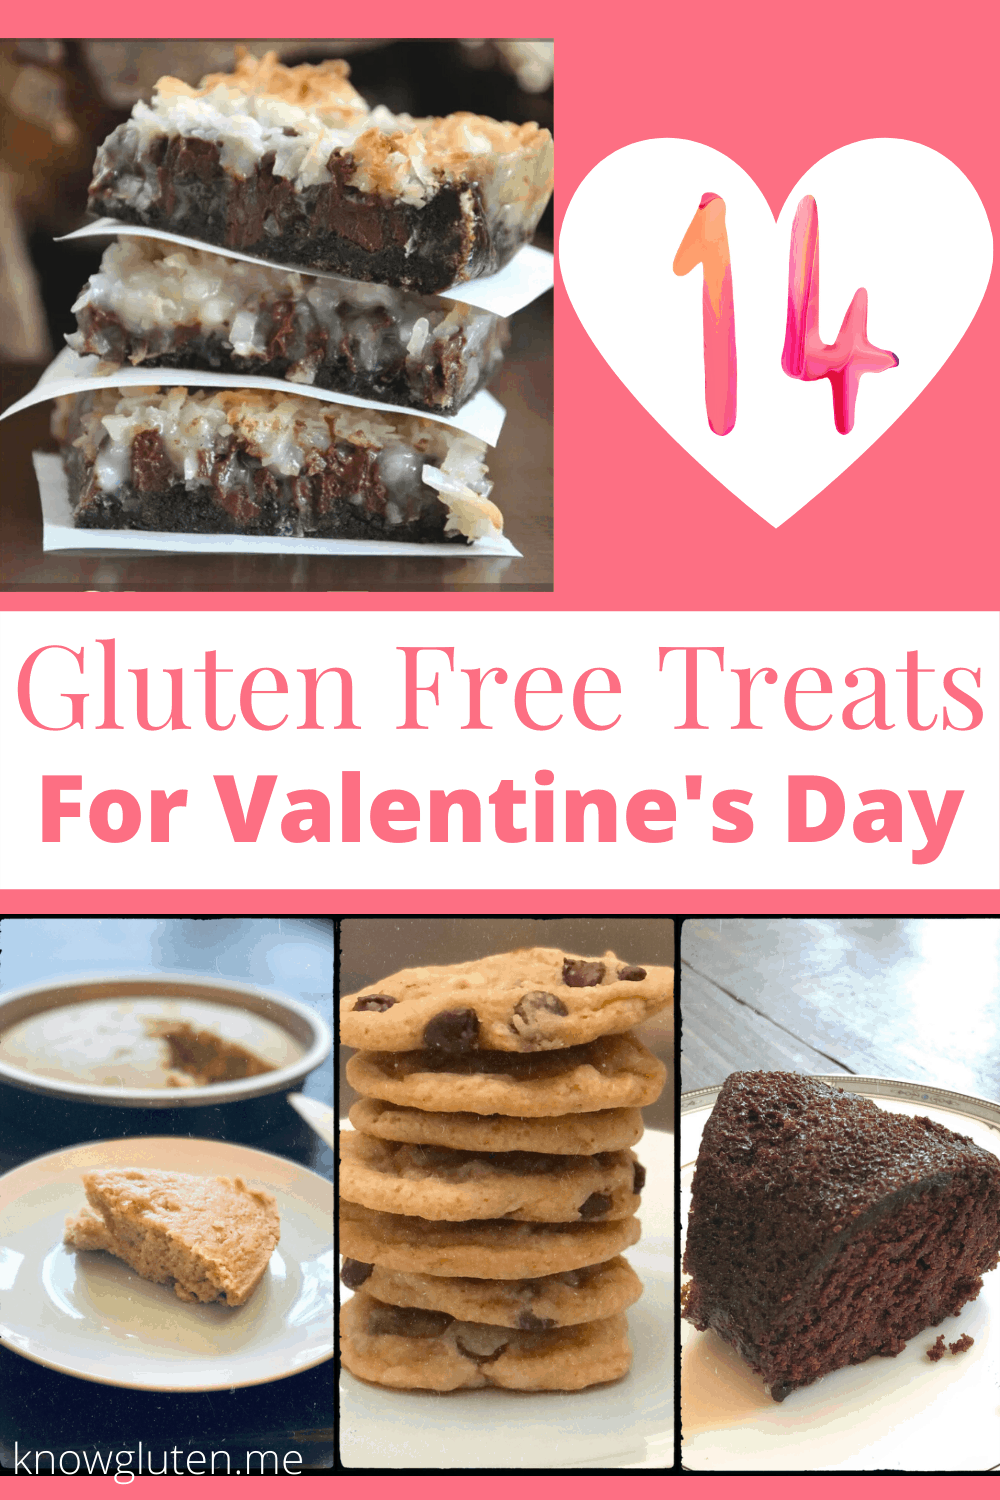 Staying in this Valentine's Day? Here are 14 Gluten Free Treats You Can Make Together.